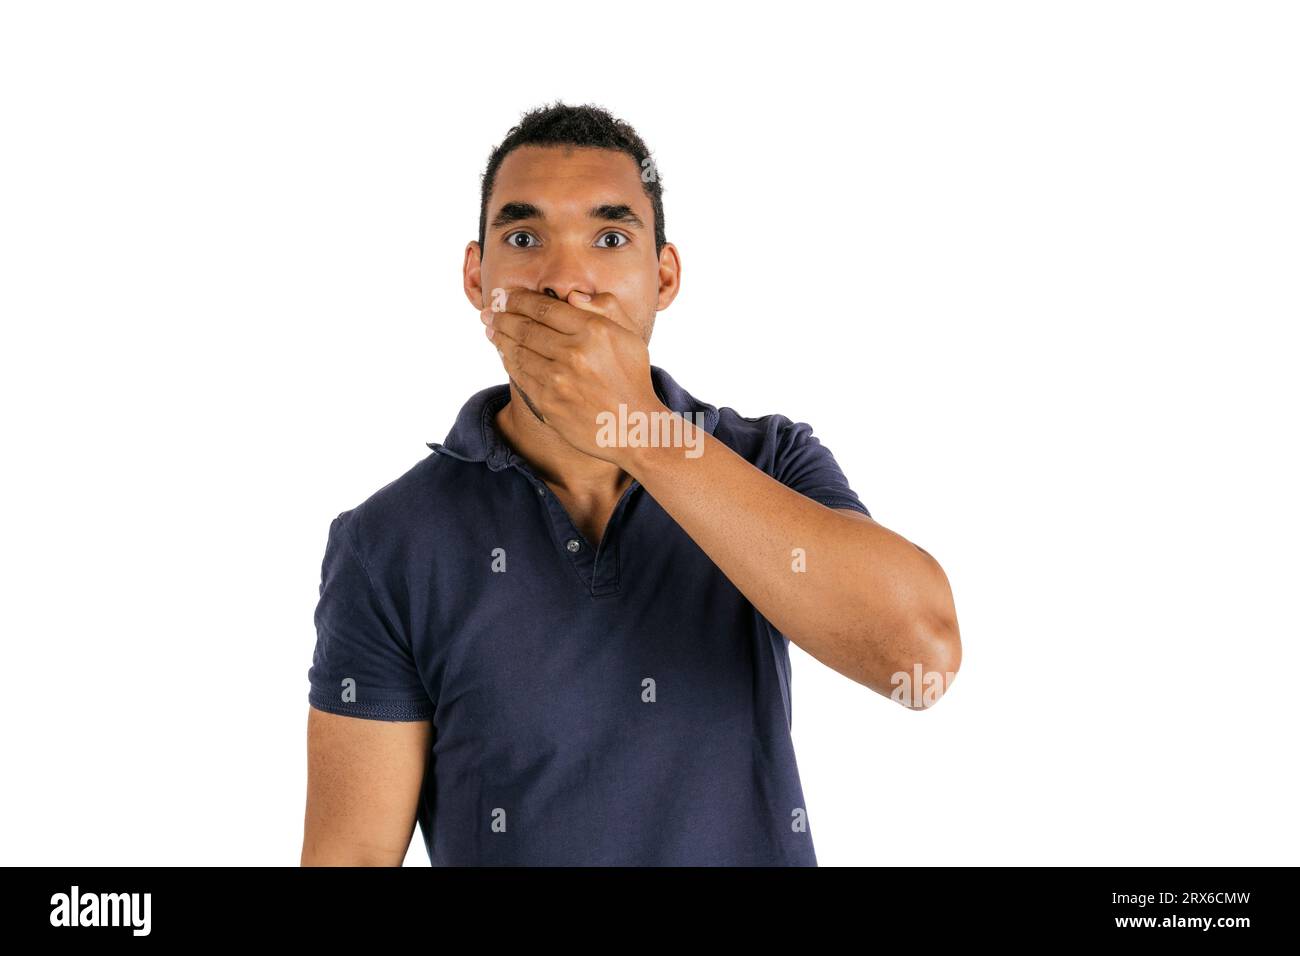 Man covering mouth with hand against white background Stock Photo